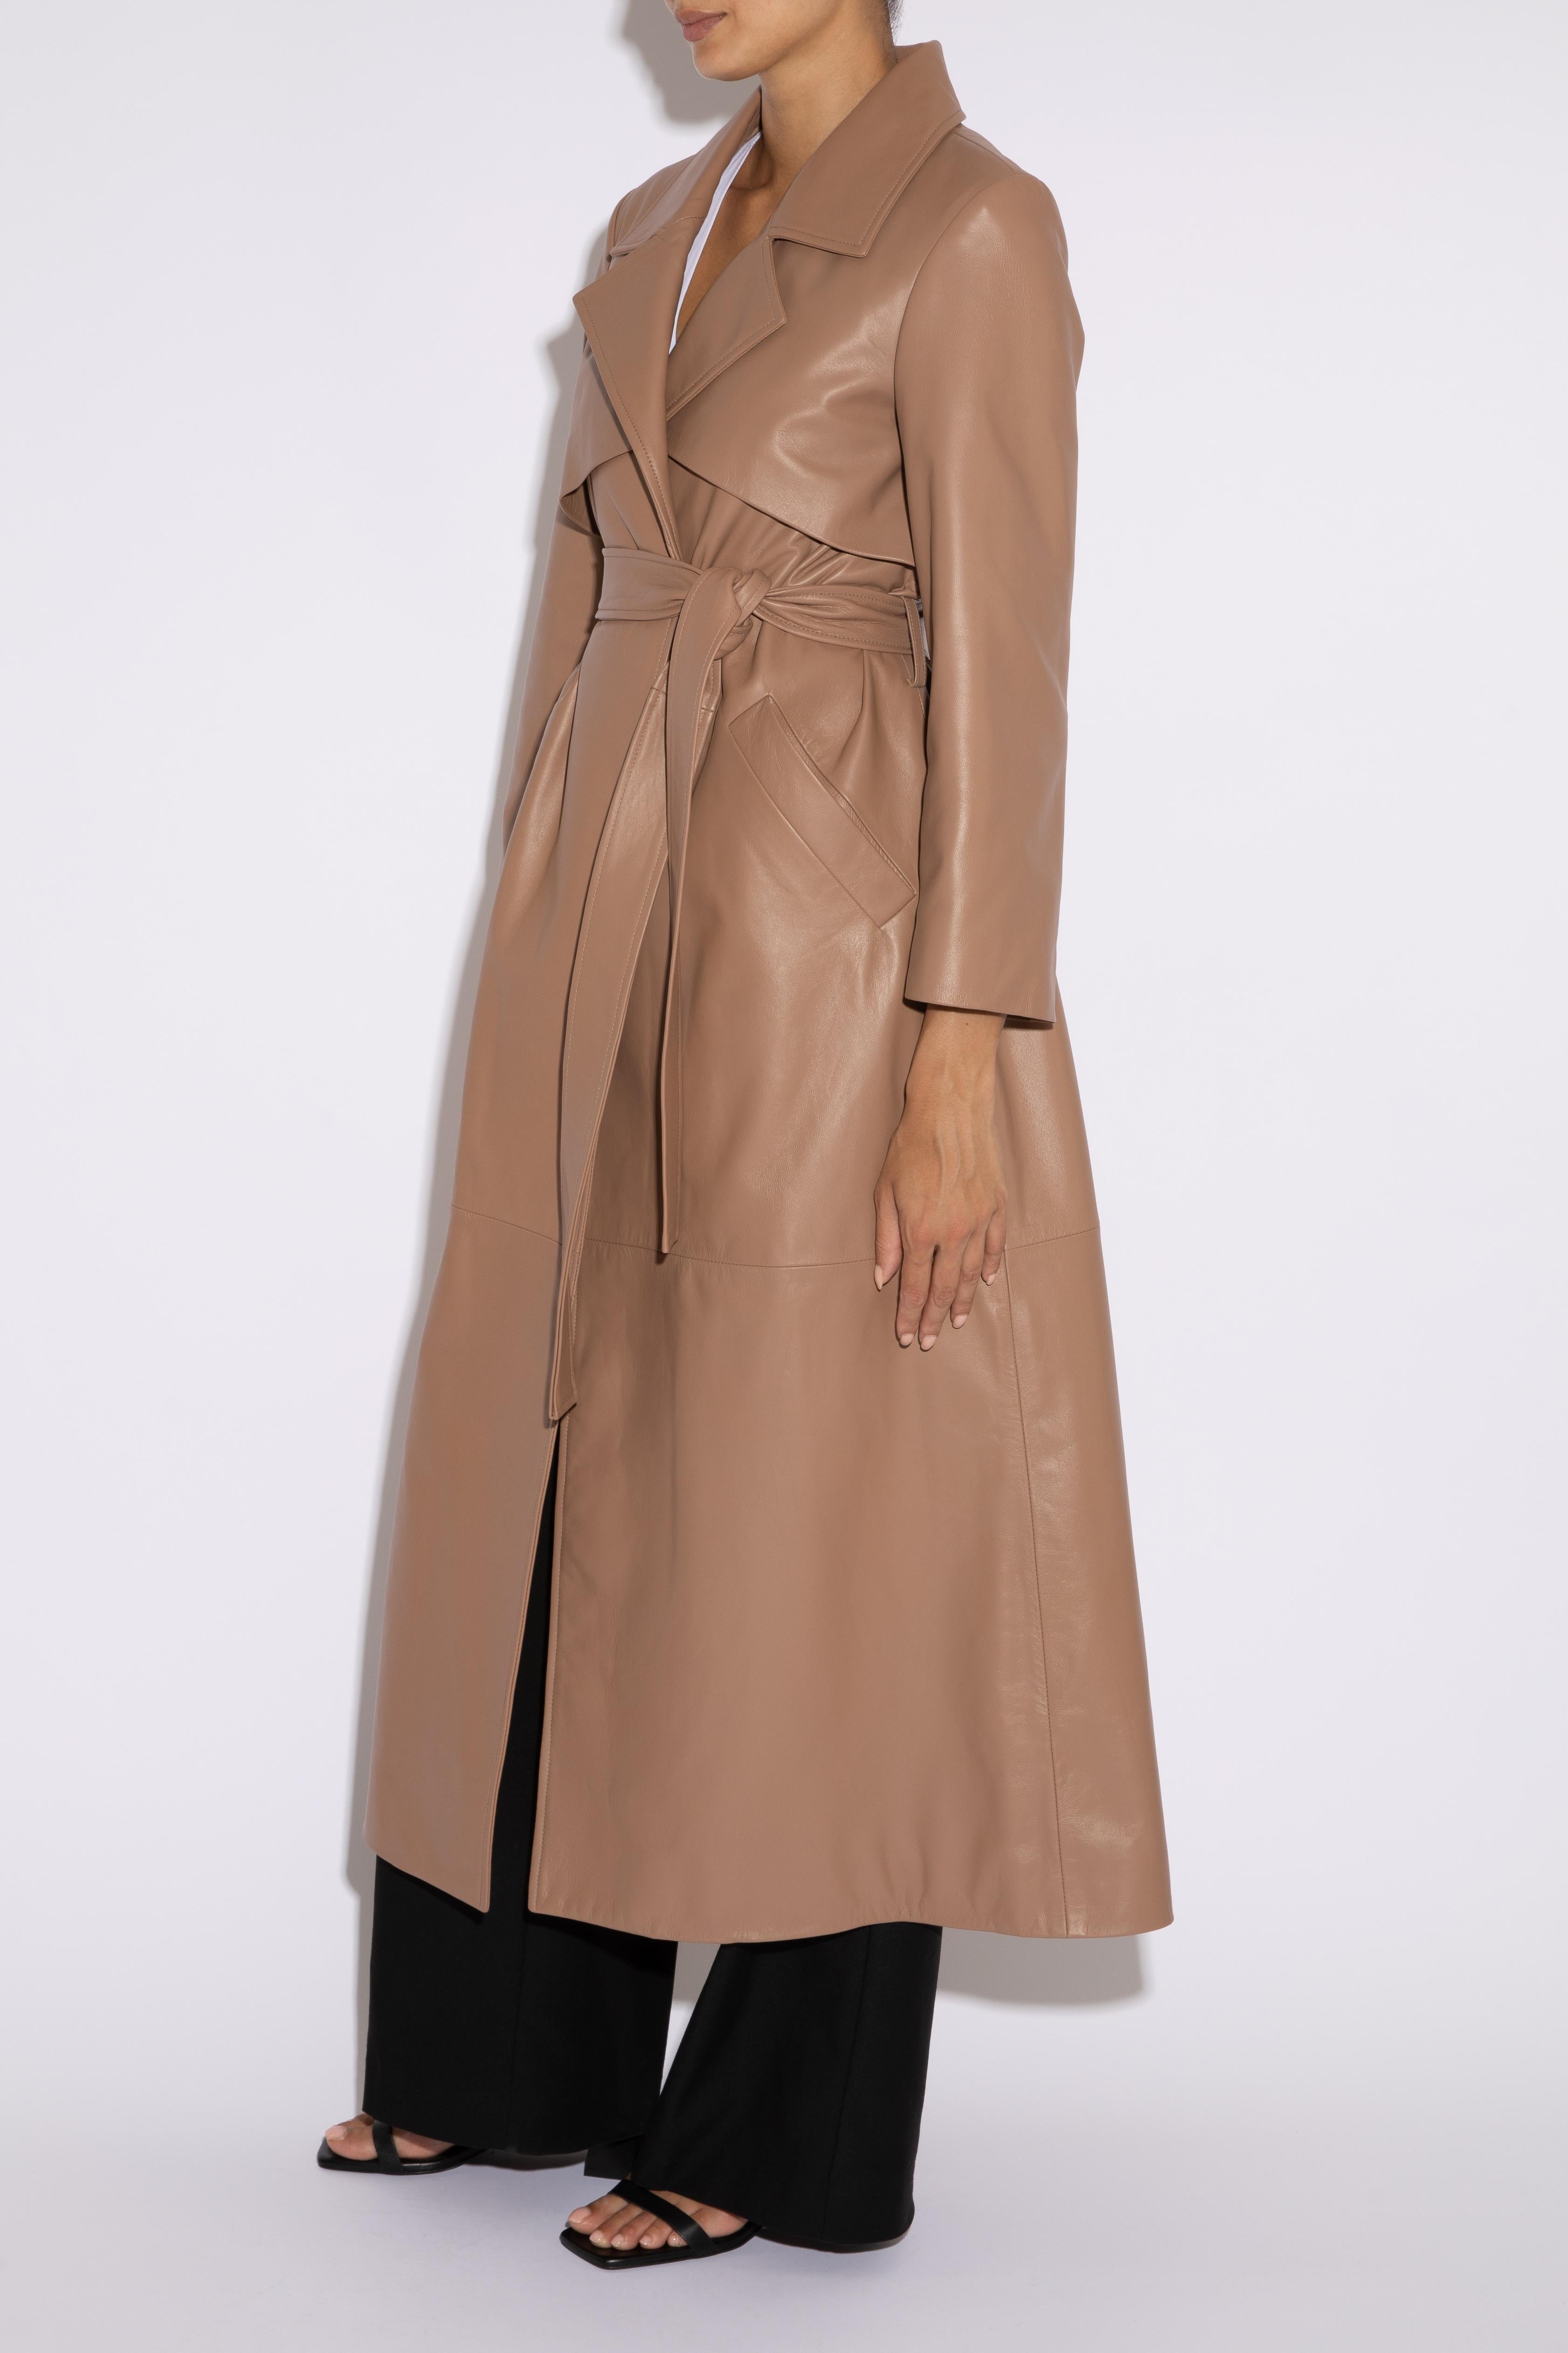 Verheyen London Leather Trench Coat in Taupe Brown - Size uk 6 For Sale 1